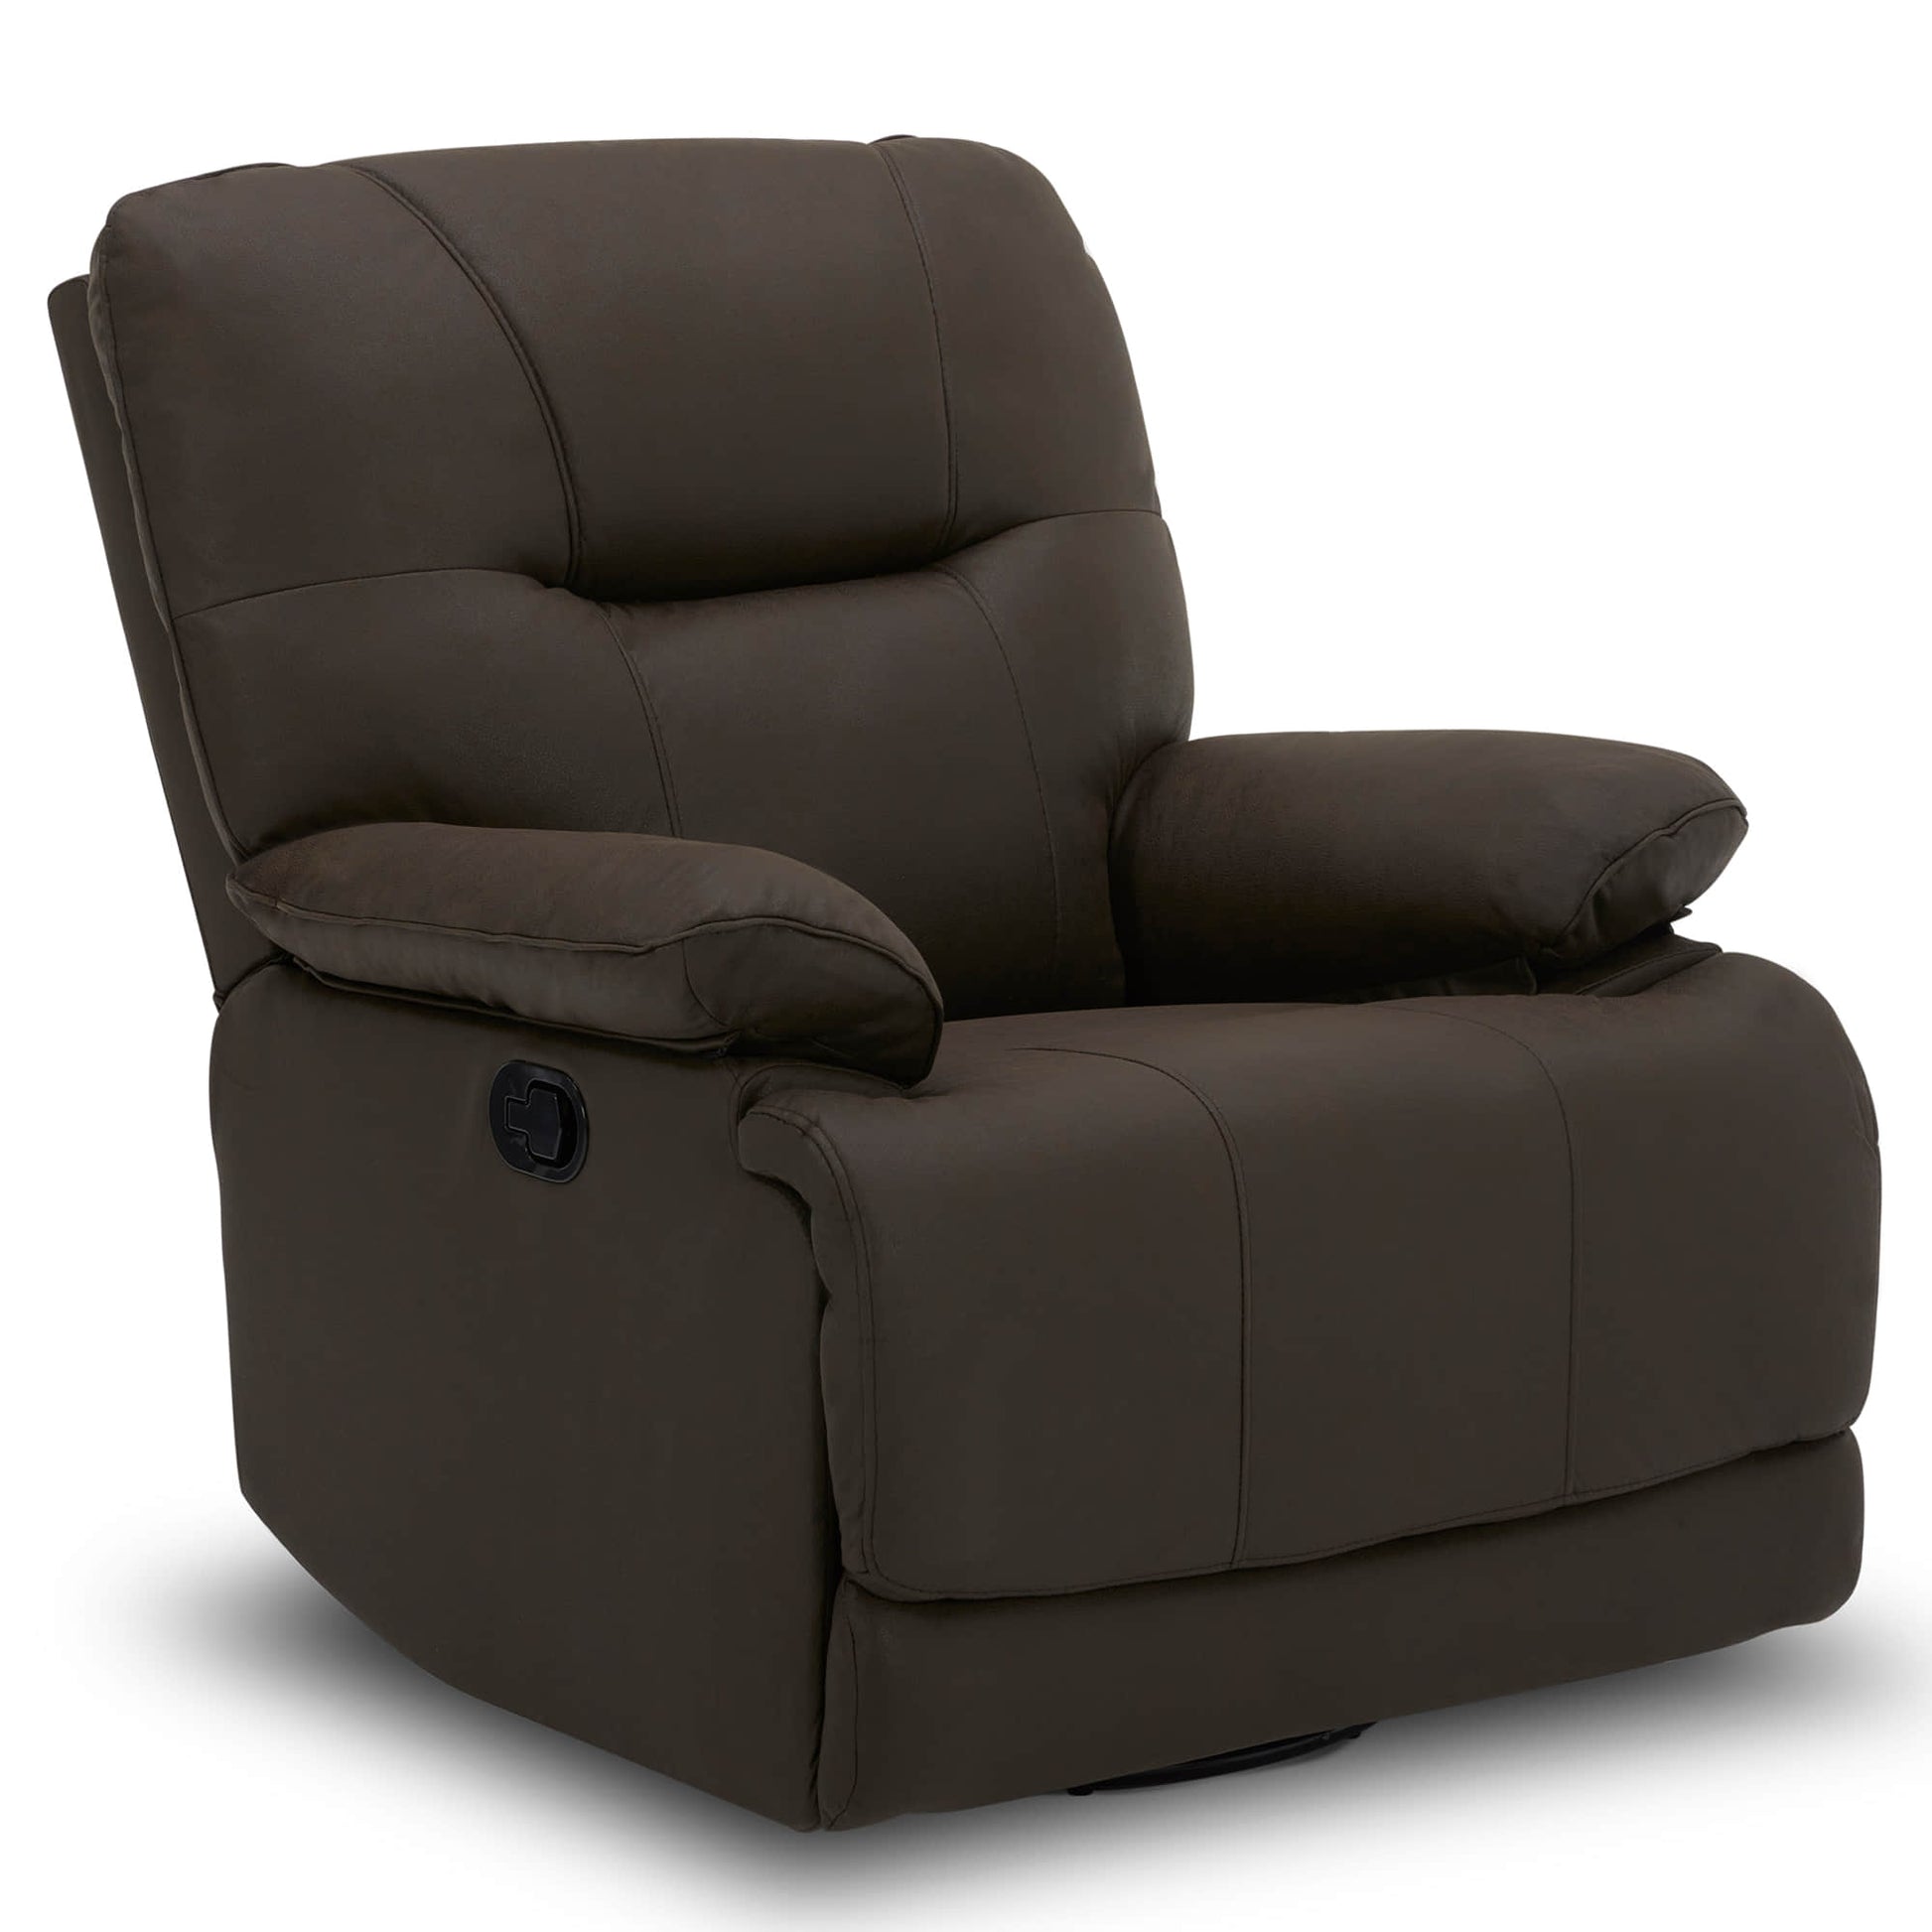 CHITA LIVING-Nya Manual Swivel Glider Recliner-Recliners-Leather Look Fabric-Espresso-